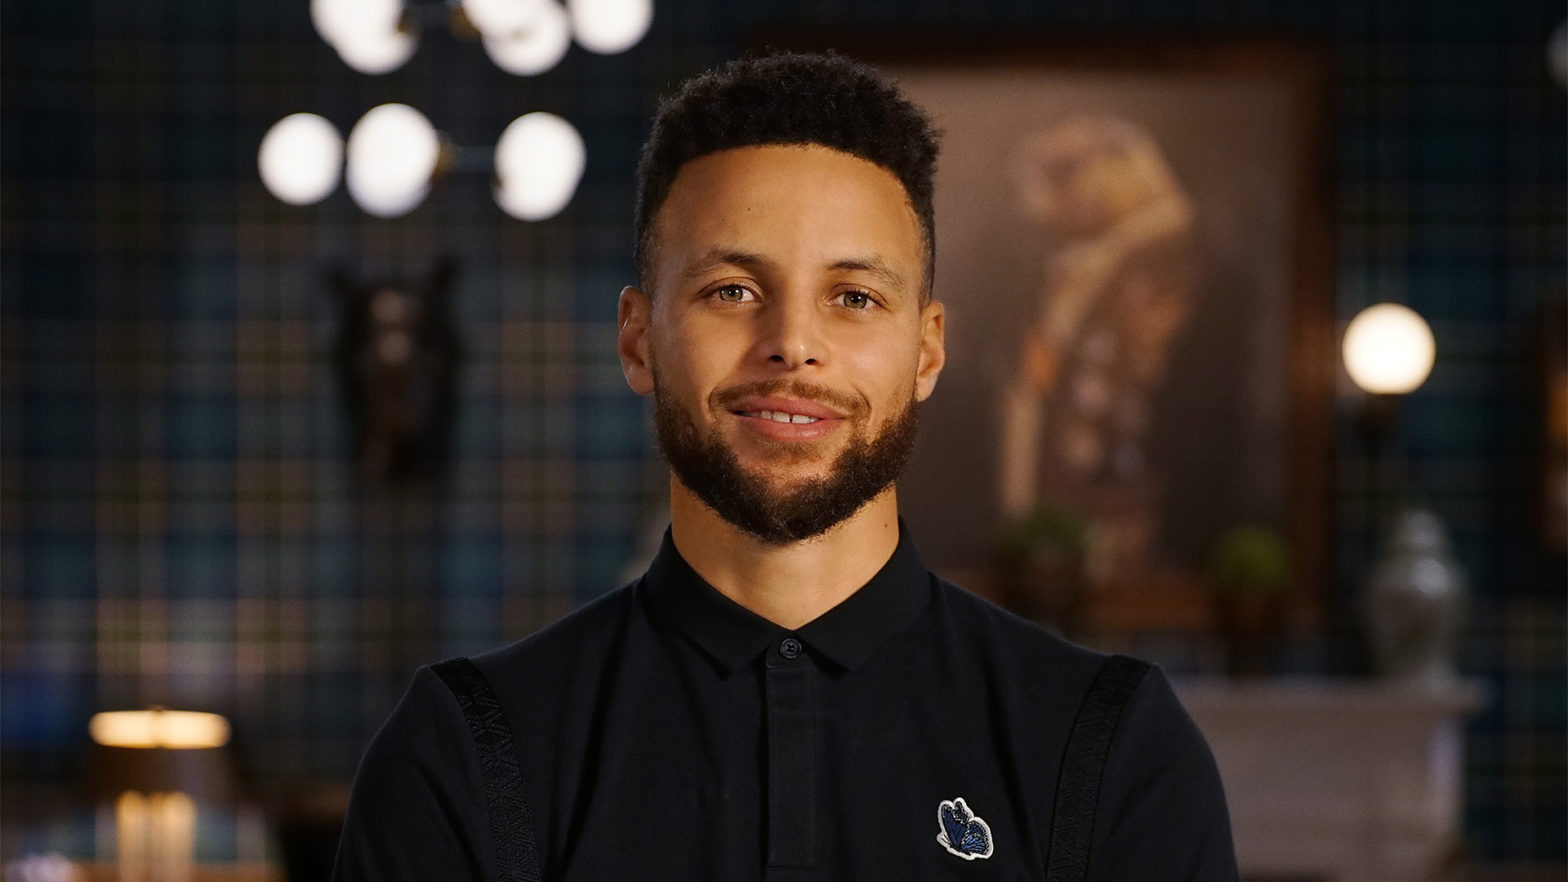 NBA Star Stephen Curry Joins Tom Brady At Crypto Exchange FTX As Shareholder And Ambassador